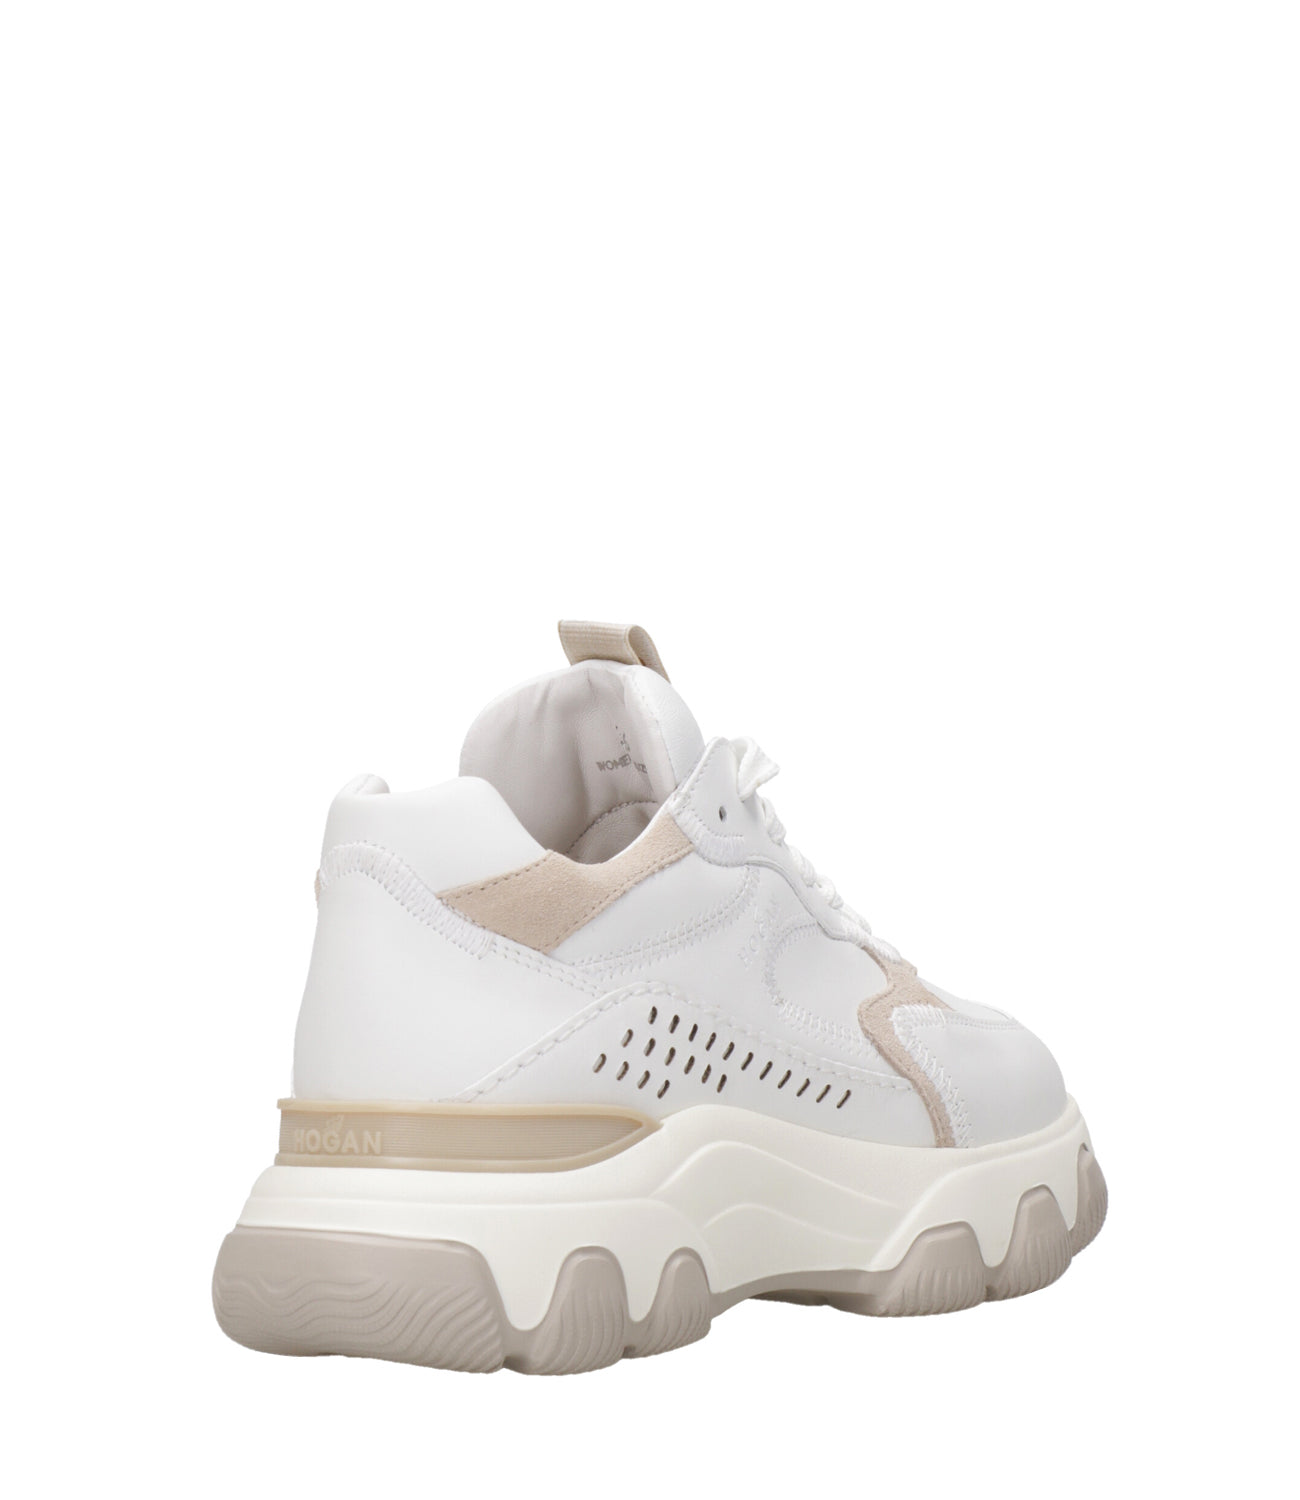 Hogan | Hyperactive Sneakers Beige and White